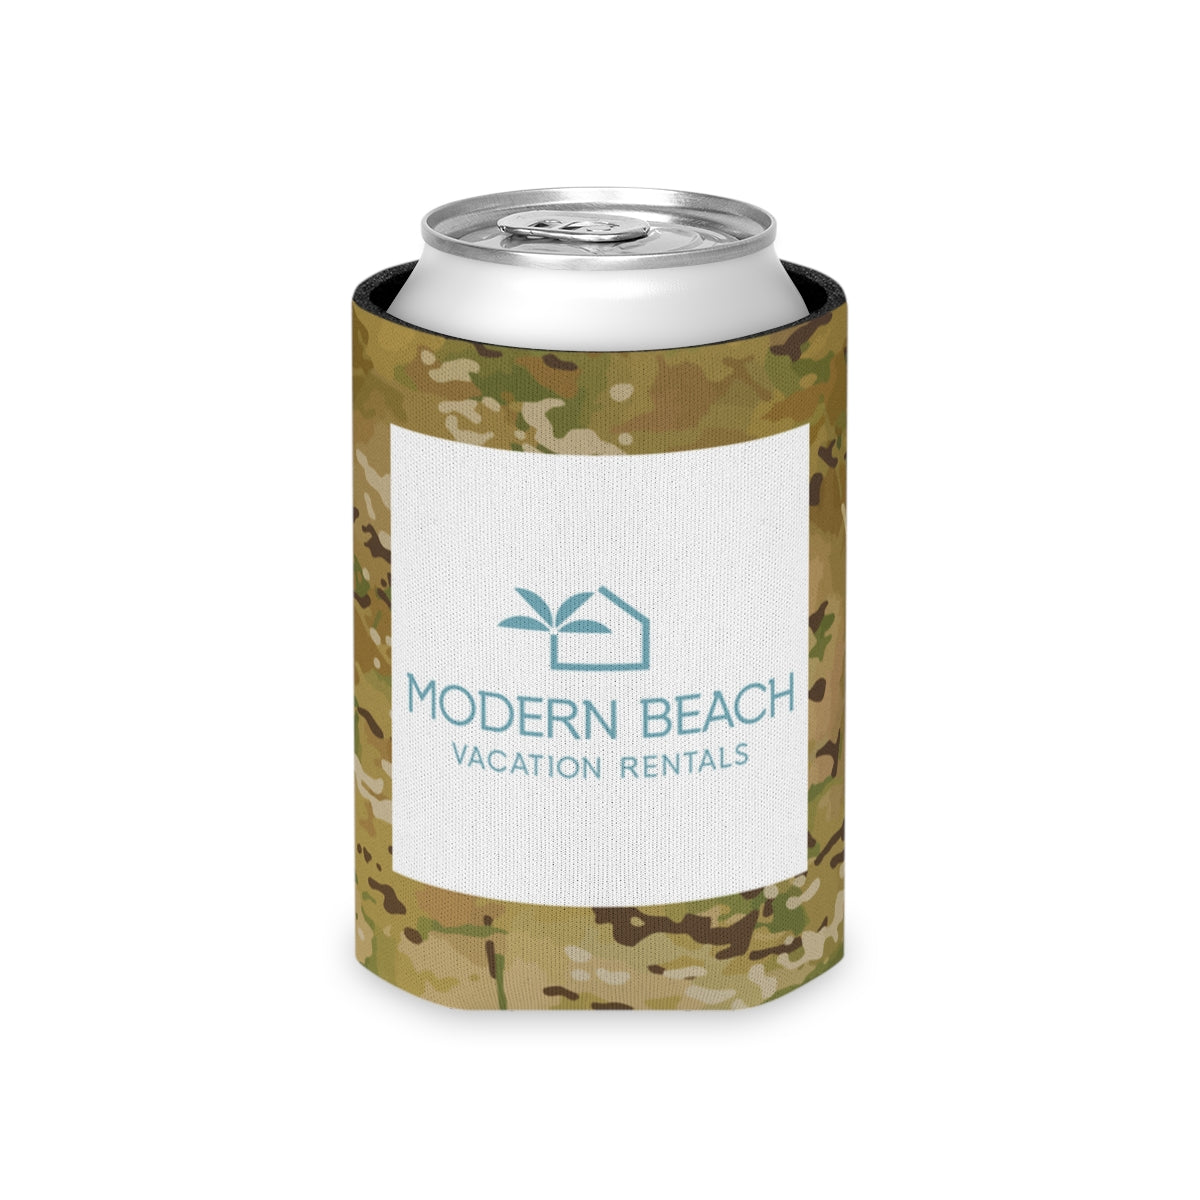 Modern Beach Vacation Rentals Basic Square Logo Camouflage OCP Can Coozie Cooler